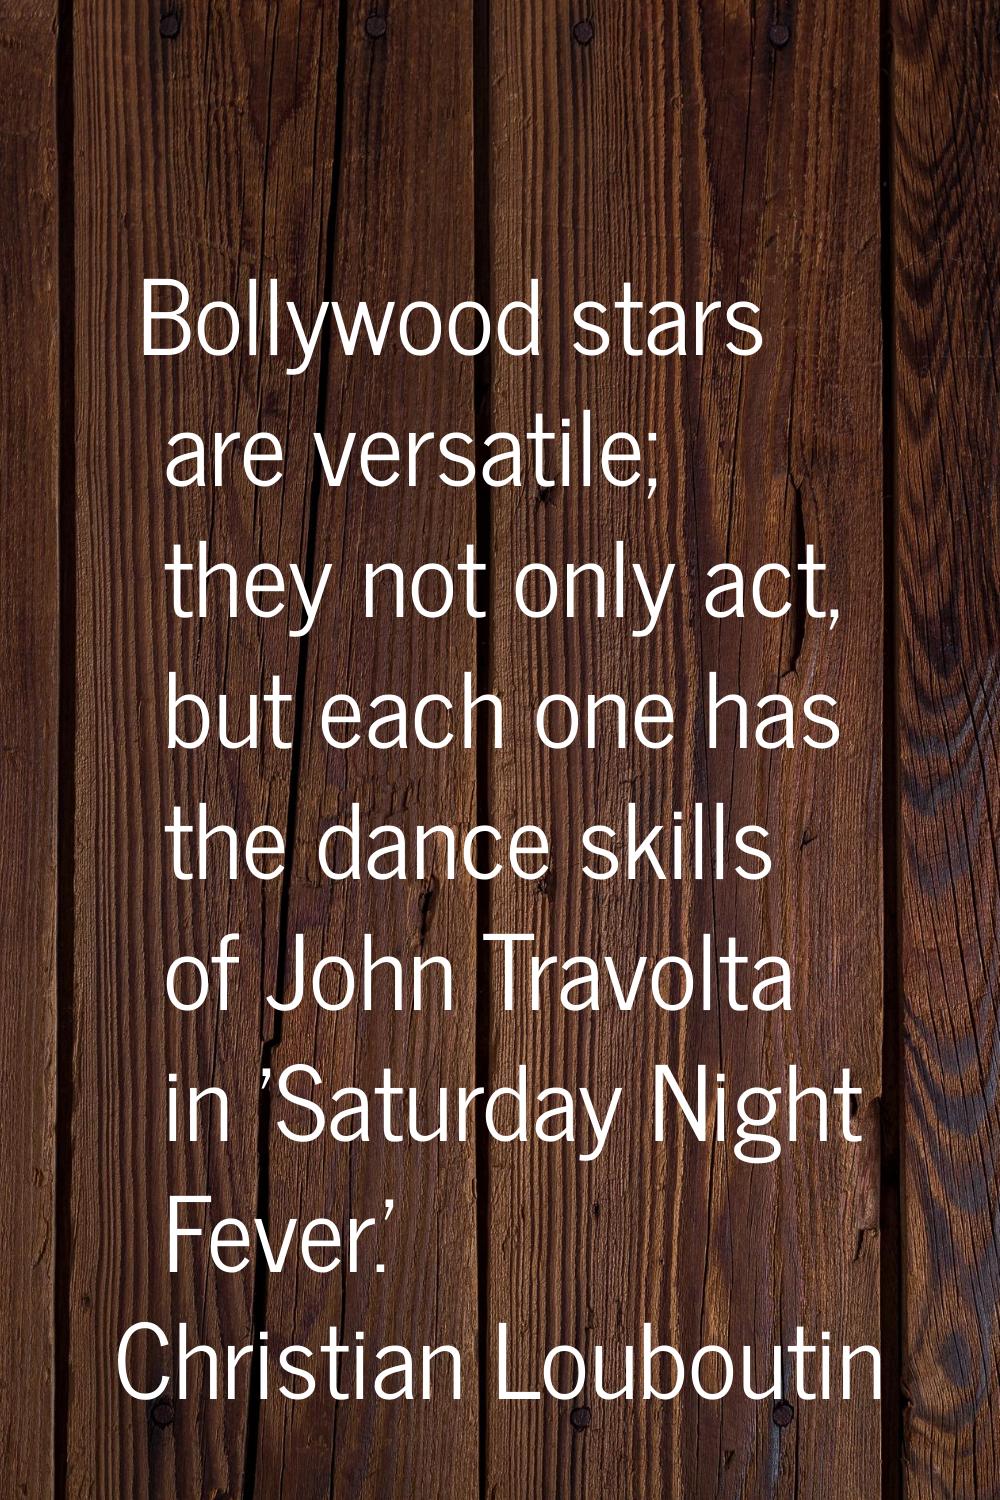 Bollywood stars are versatile; they not only act, but each one has the dance skills of John Travolt